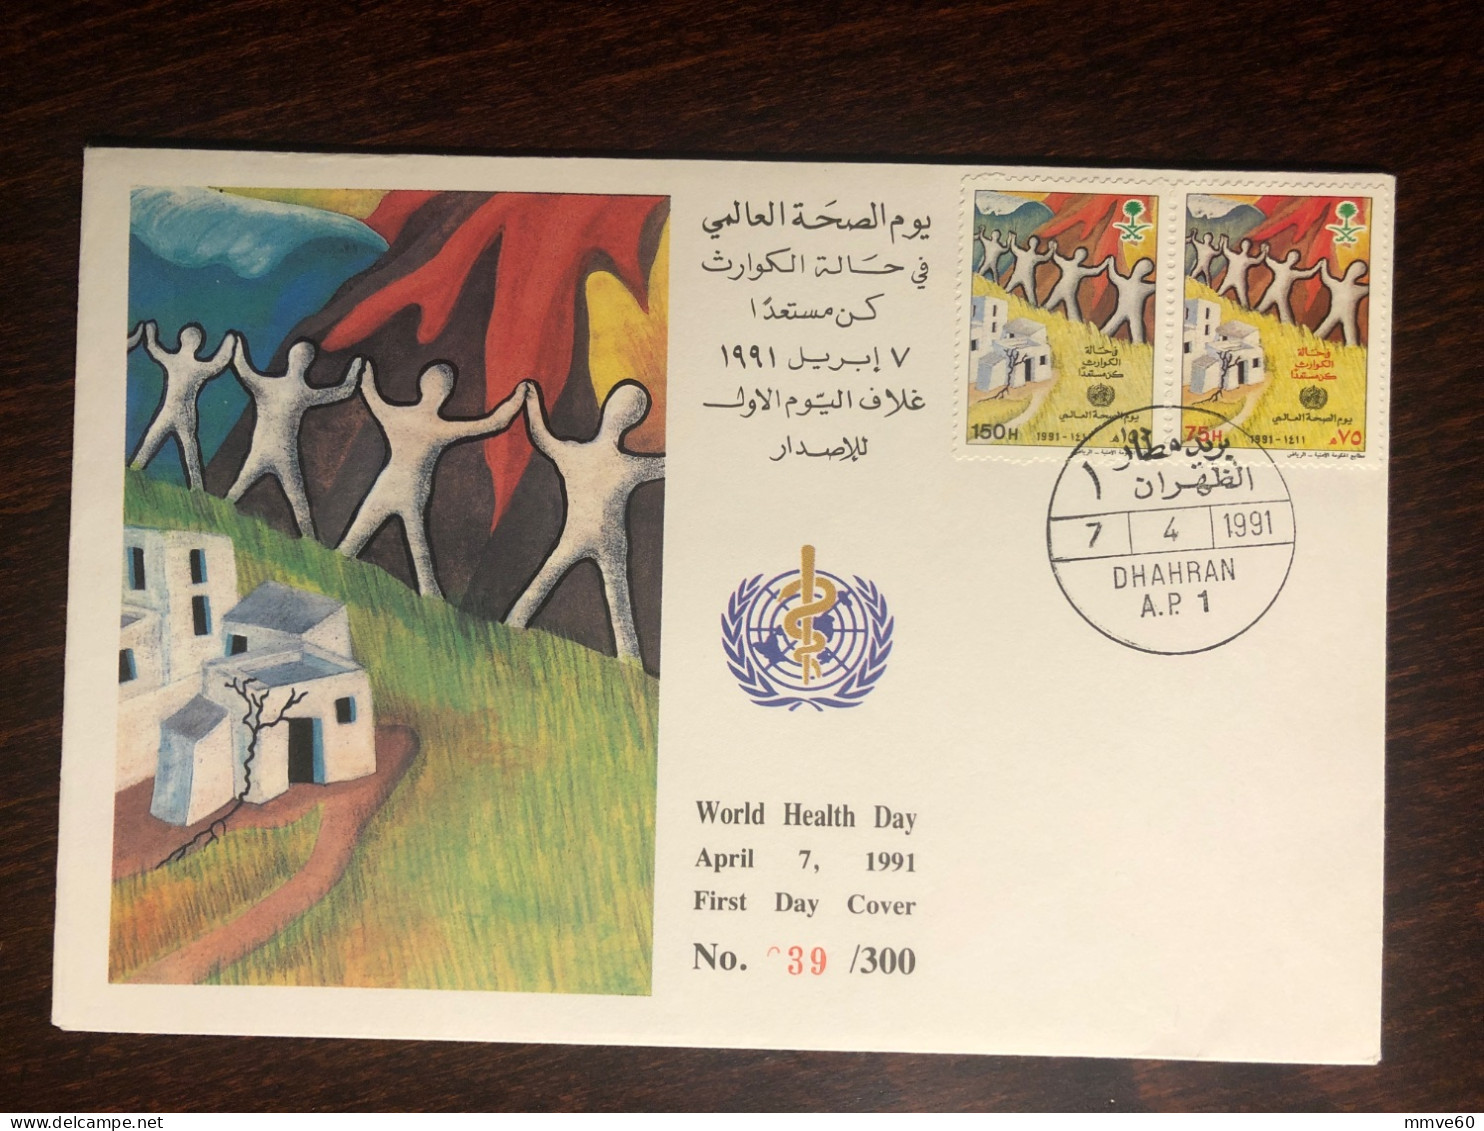 SAUDI ARABIA FDC COVER ONLY 300 ISSUED 1991 YEAR WHO HEALTH MEDICINE STAMPS - Arabia Saudita